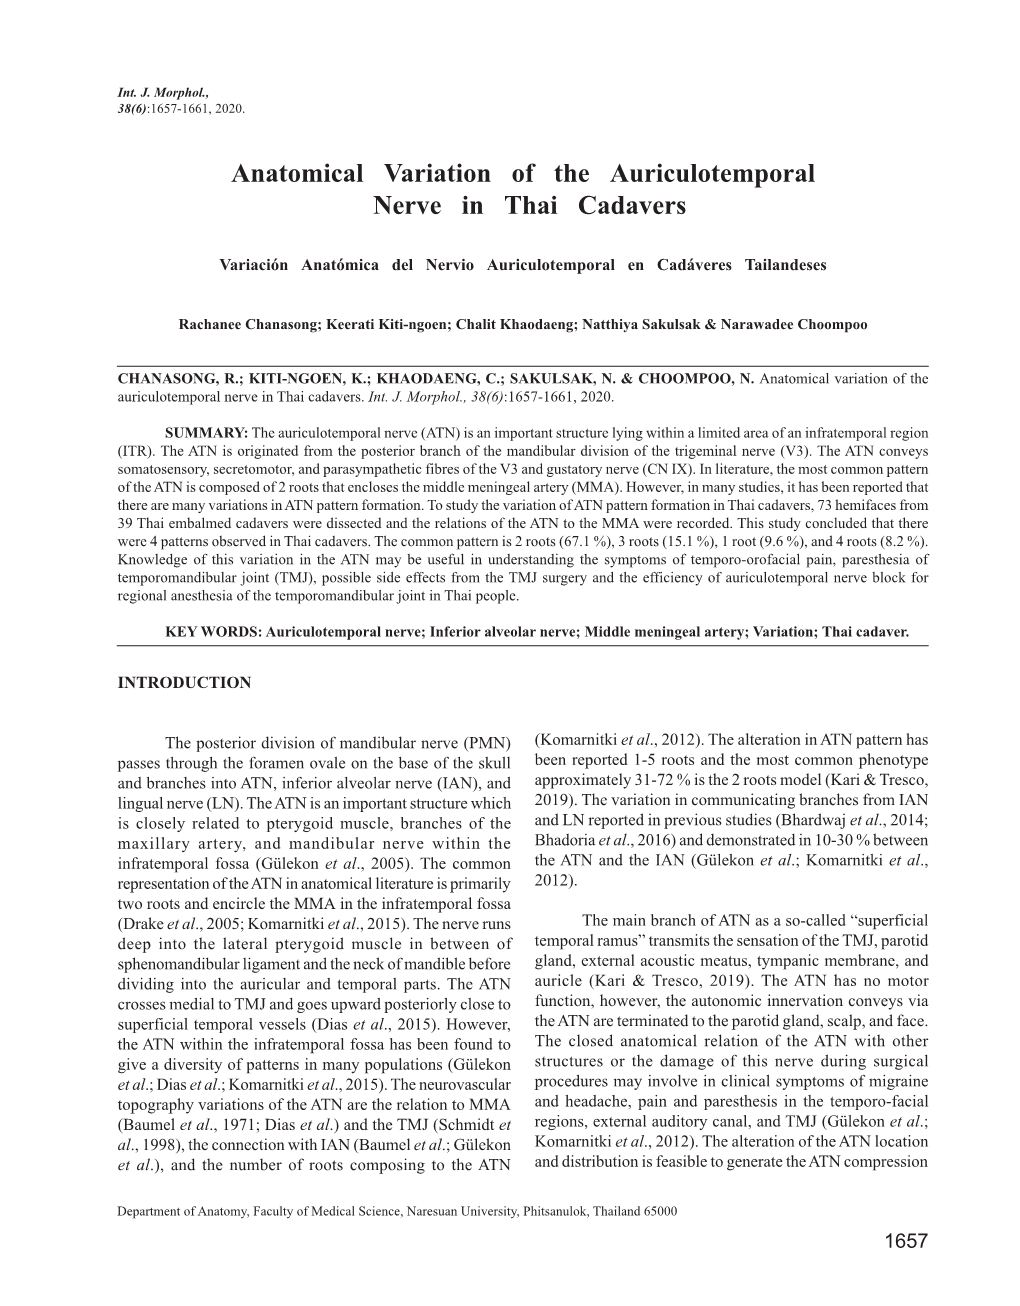 Anatomical Variation of the Auriculotemporal Nerve in Thai Cadavers